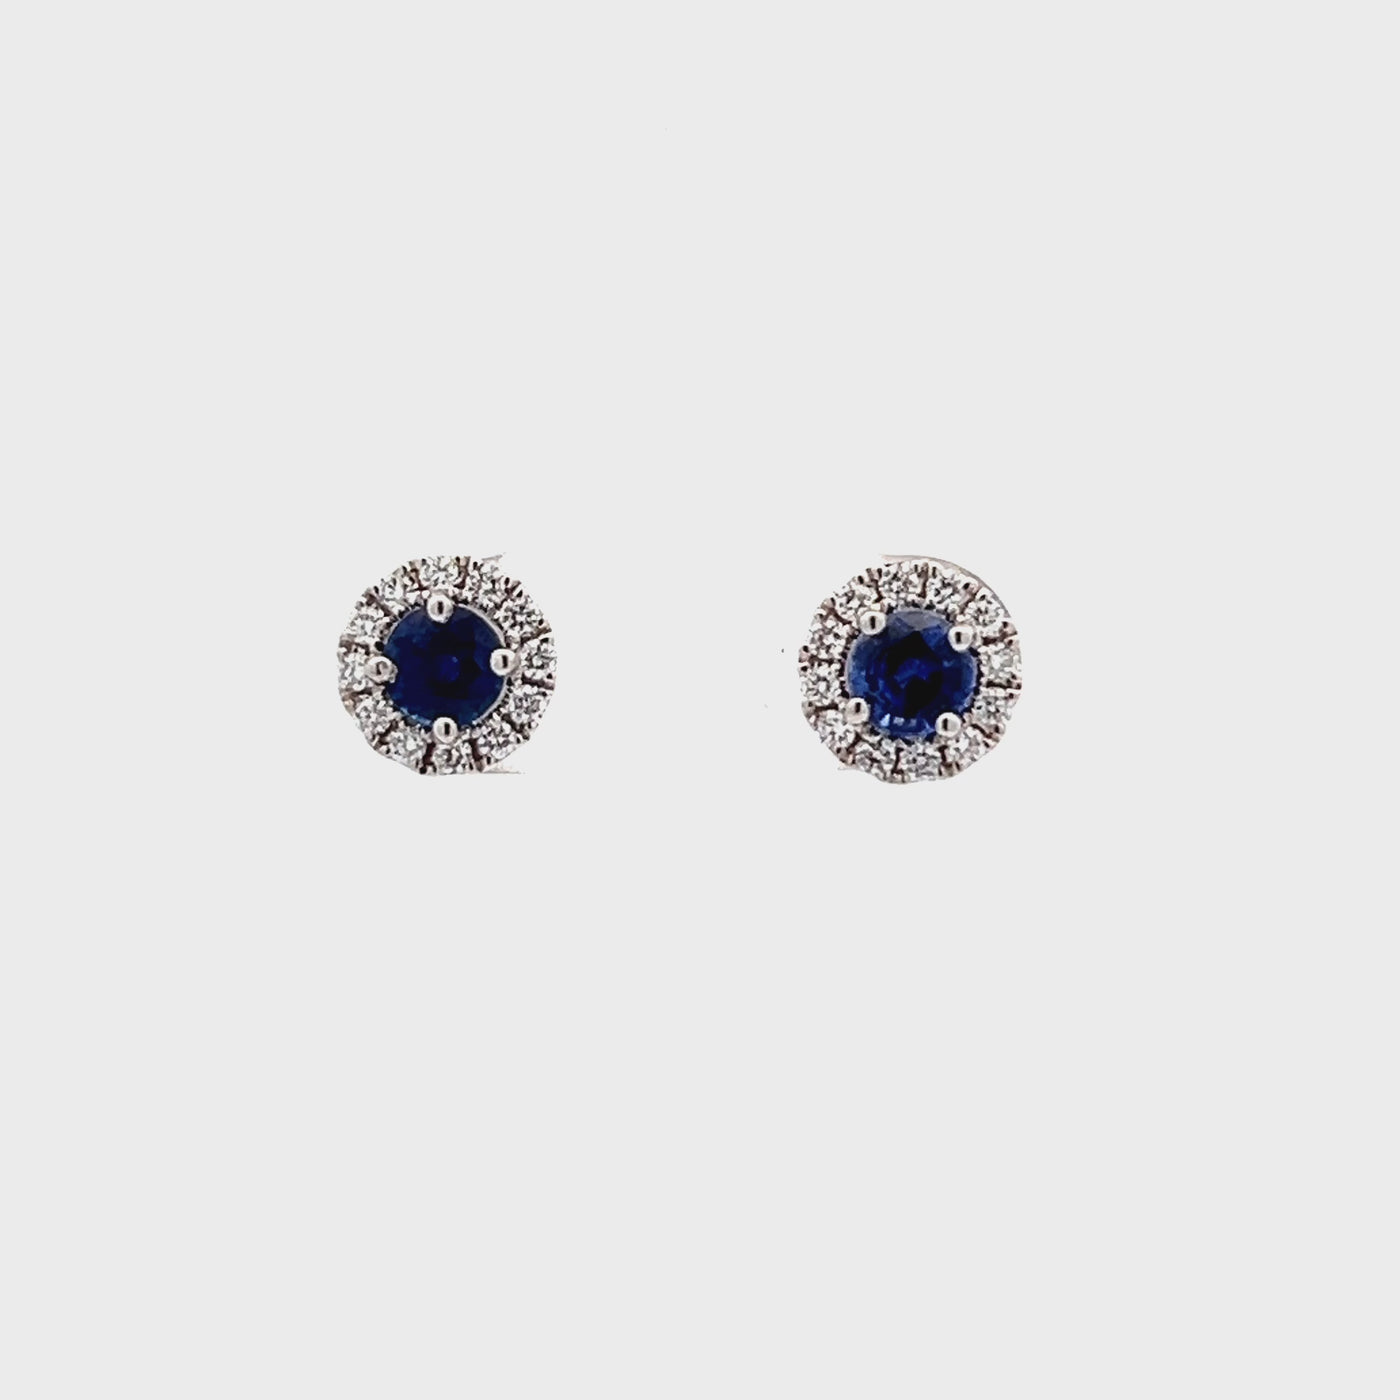 14k White Gold Round Sapphire and Diamond Halo Earrings (0.87ctw.)